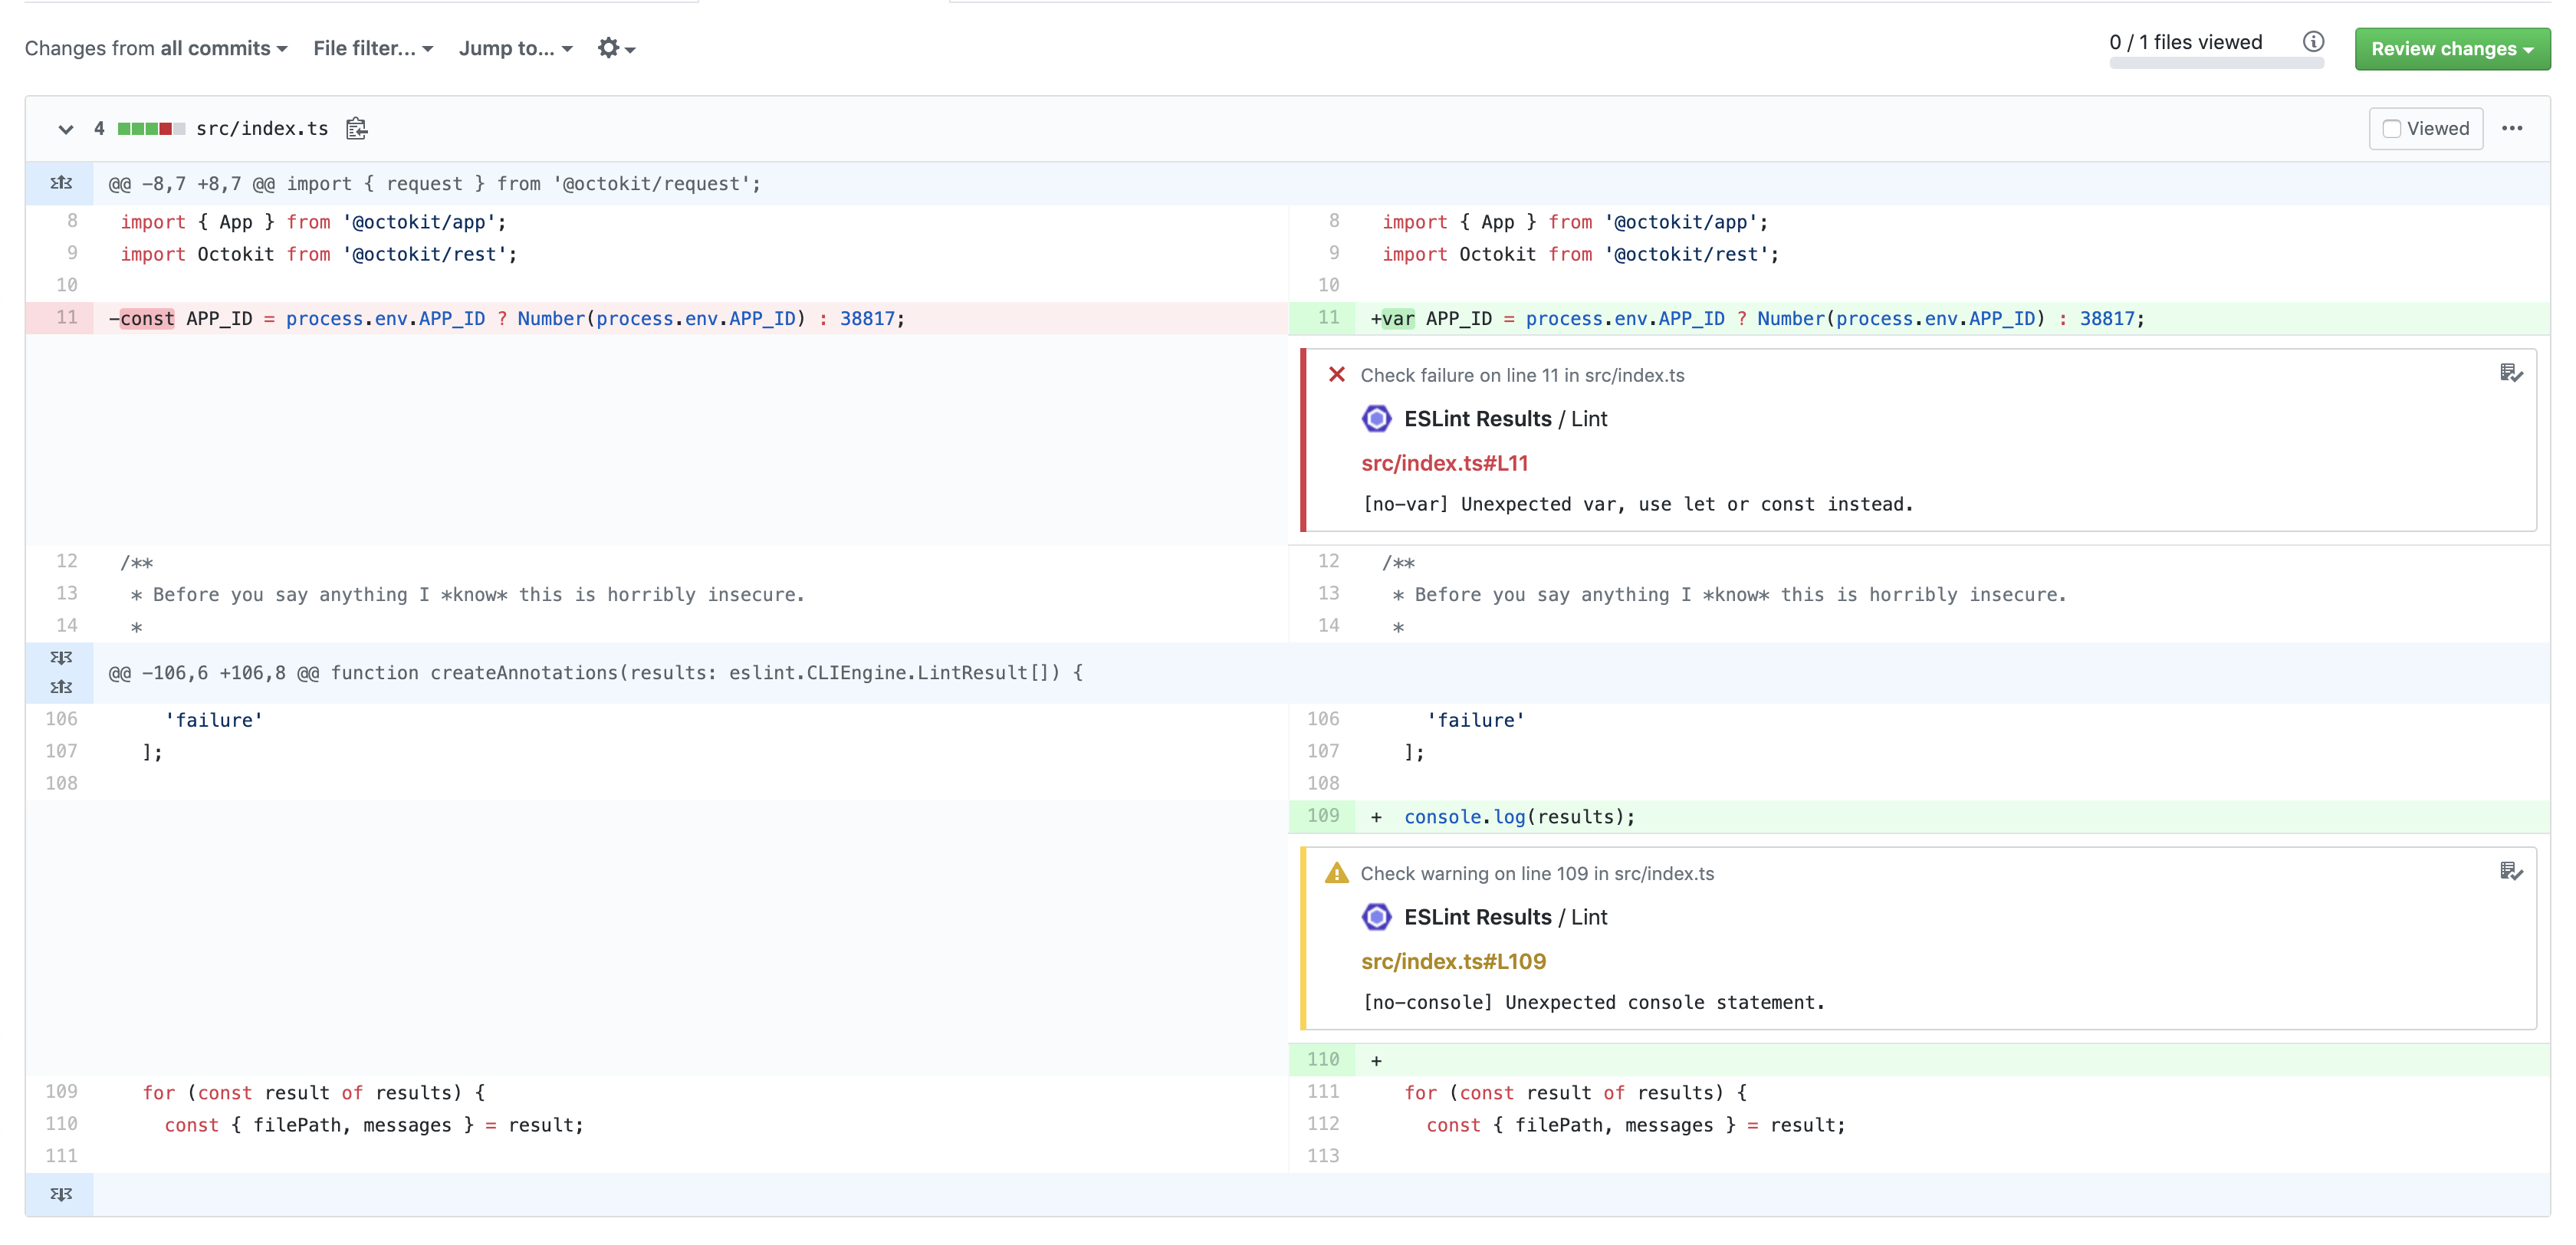 Example of annotations being included in a pull request